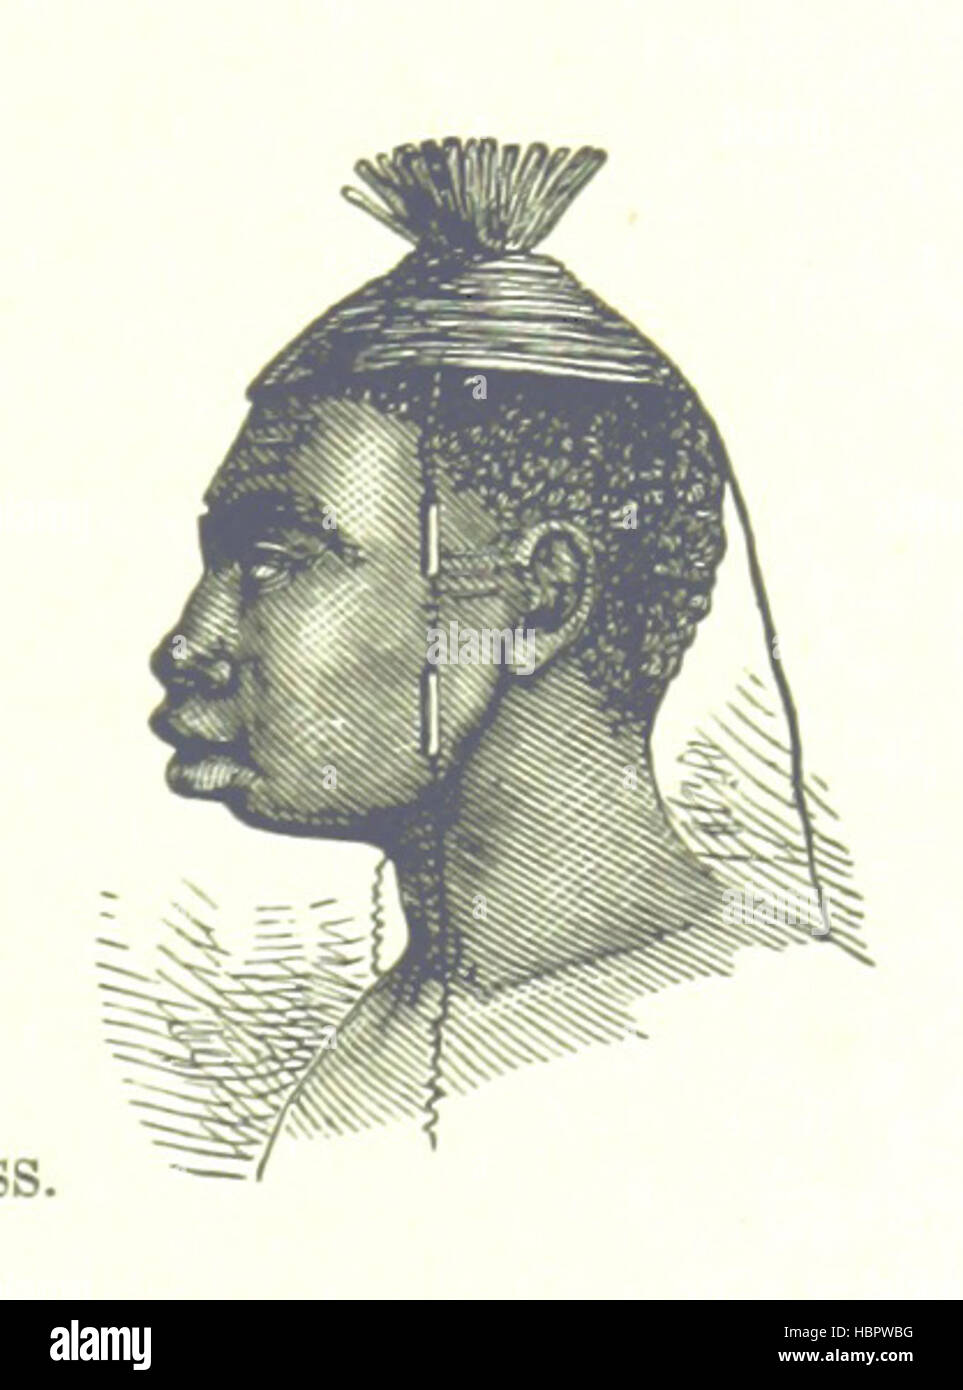 Image taken from page 63 of 'Great Explorers of Africa. With illustrations and map' Image taken from page 63 of 'Great Explorers of Africa Stock Photo